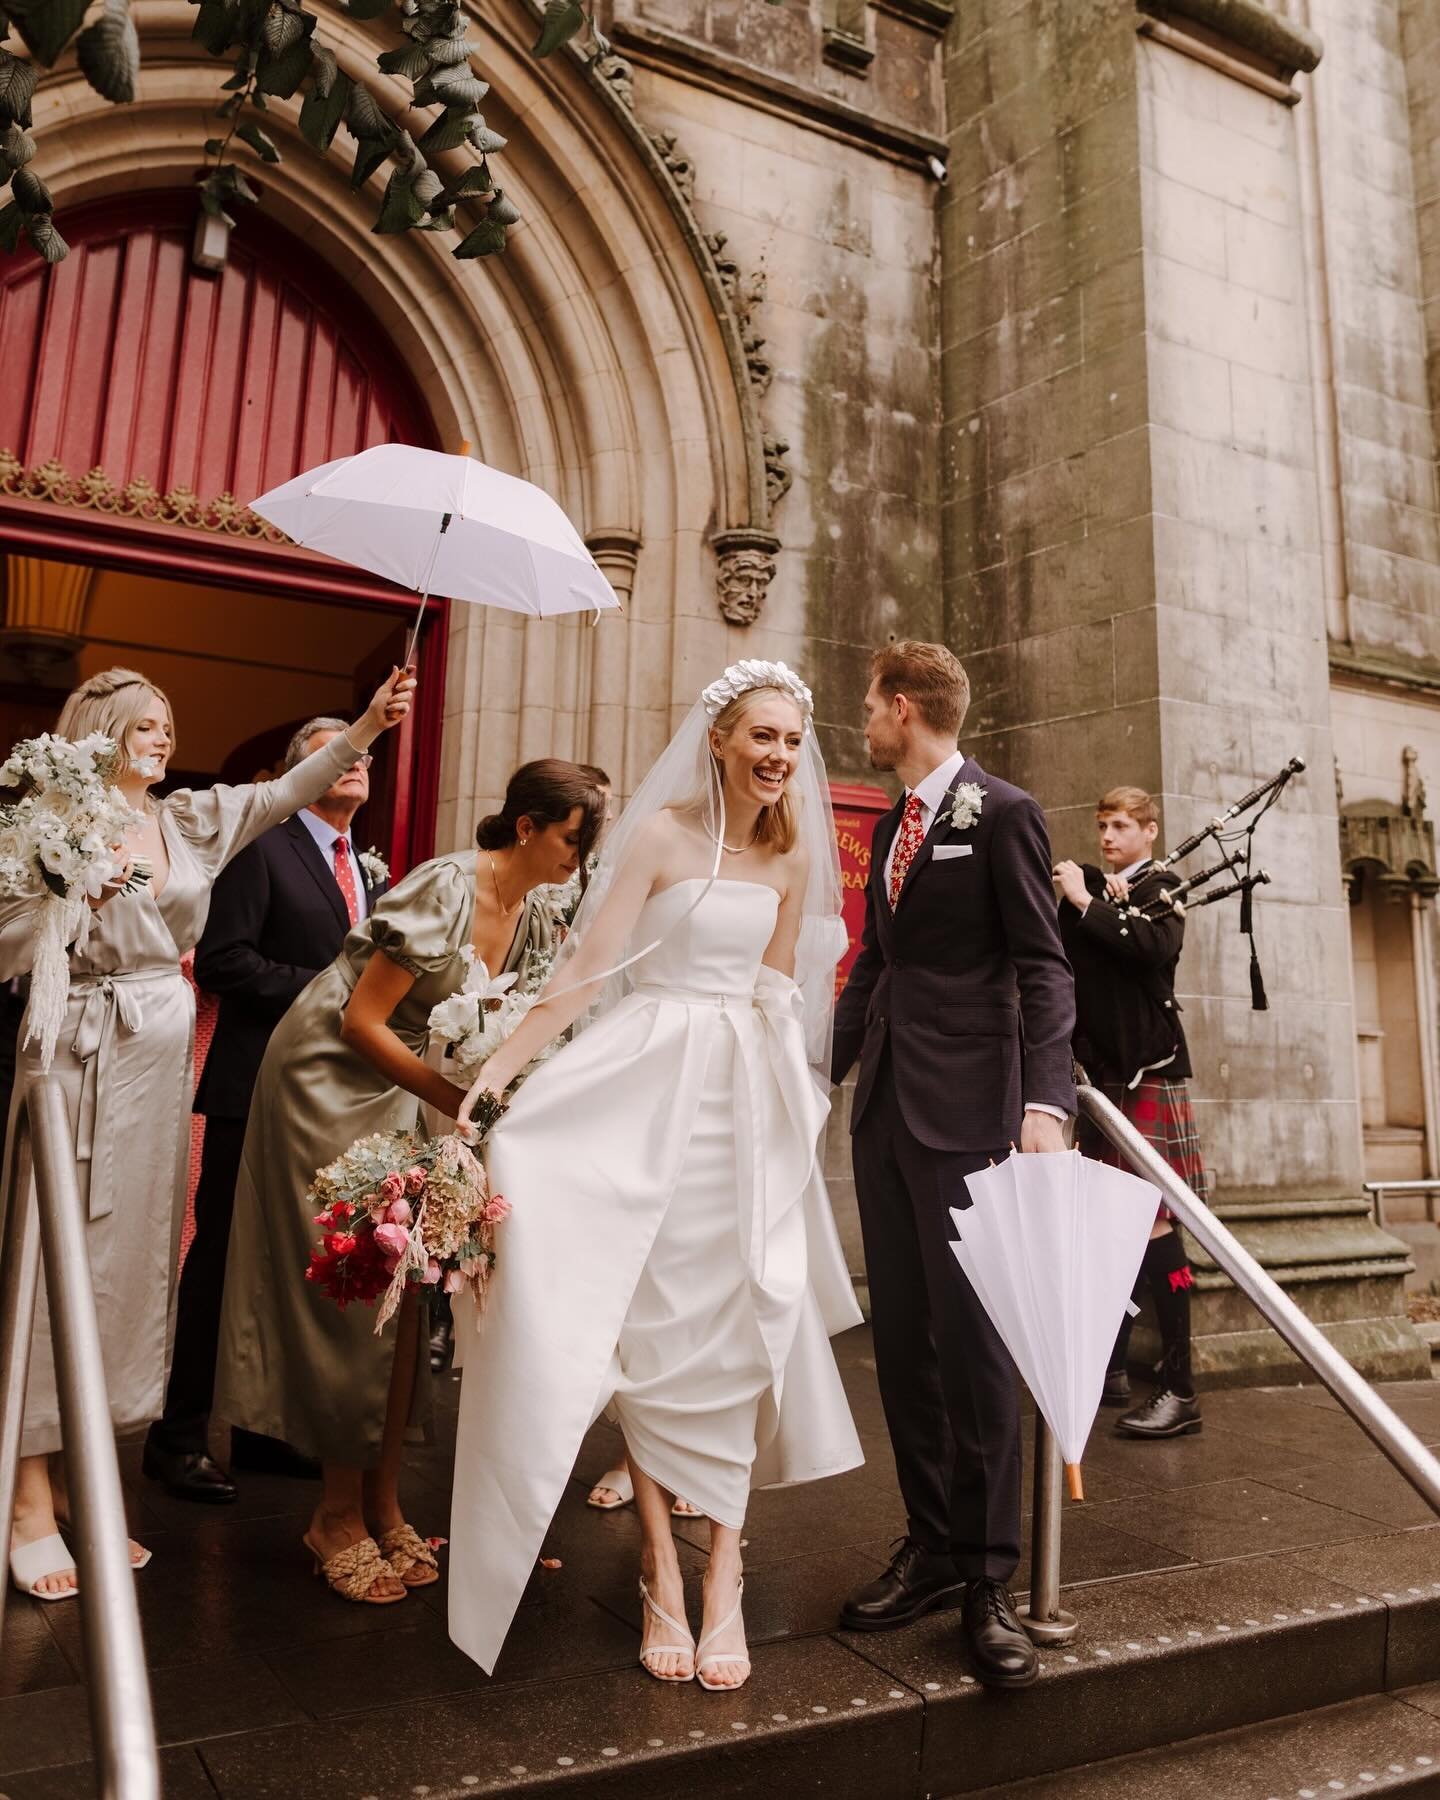 &ldquo;I loved the simplicity of the styles but the big skirt still gave it the wow factor. Also completely loved that the skirt had pockets!! I took the skirt off for the evening part of the wedding and it felt like a whole new dress.&rdquo;

Beauti